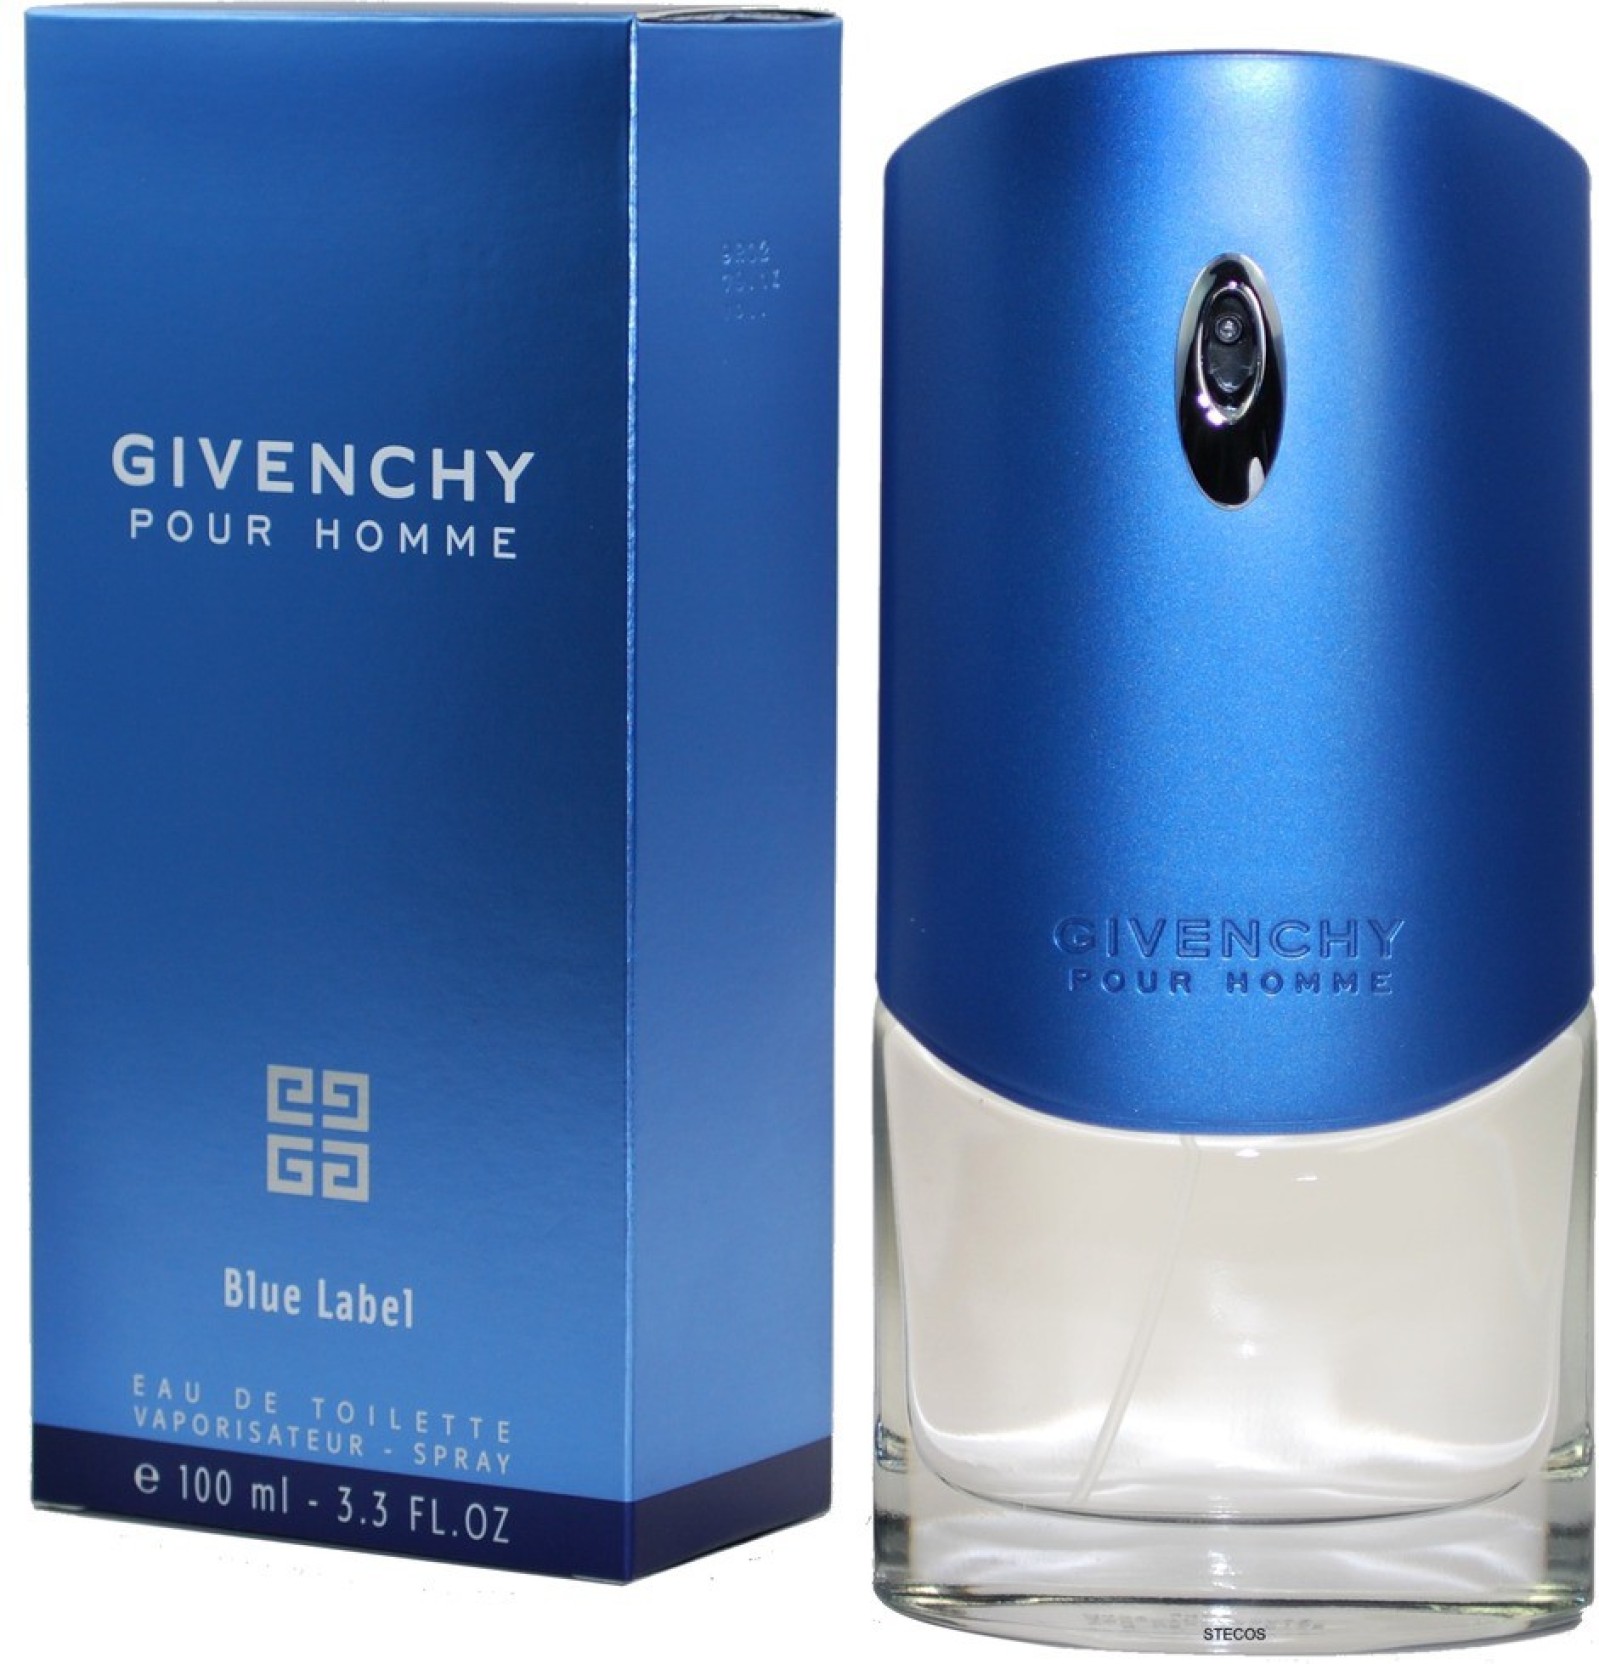 Givenchy pour homme 100. Givenchy pour homme Blue Label. Givenchy Blue Label 100ml. Givenchy pour homme Blue Label Givenchy. Givenchy pour homme Blue Label EDT, 100 ml.